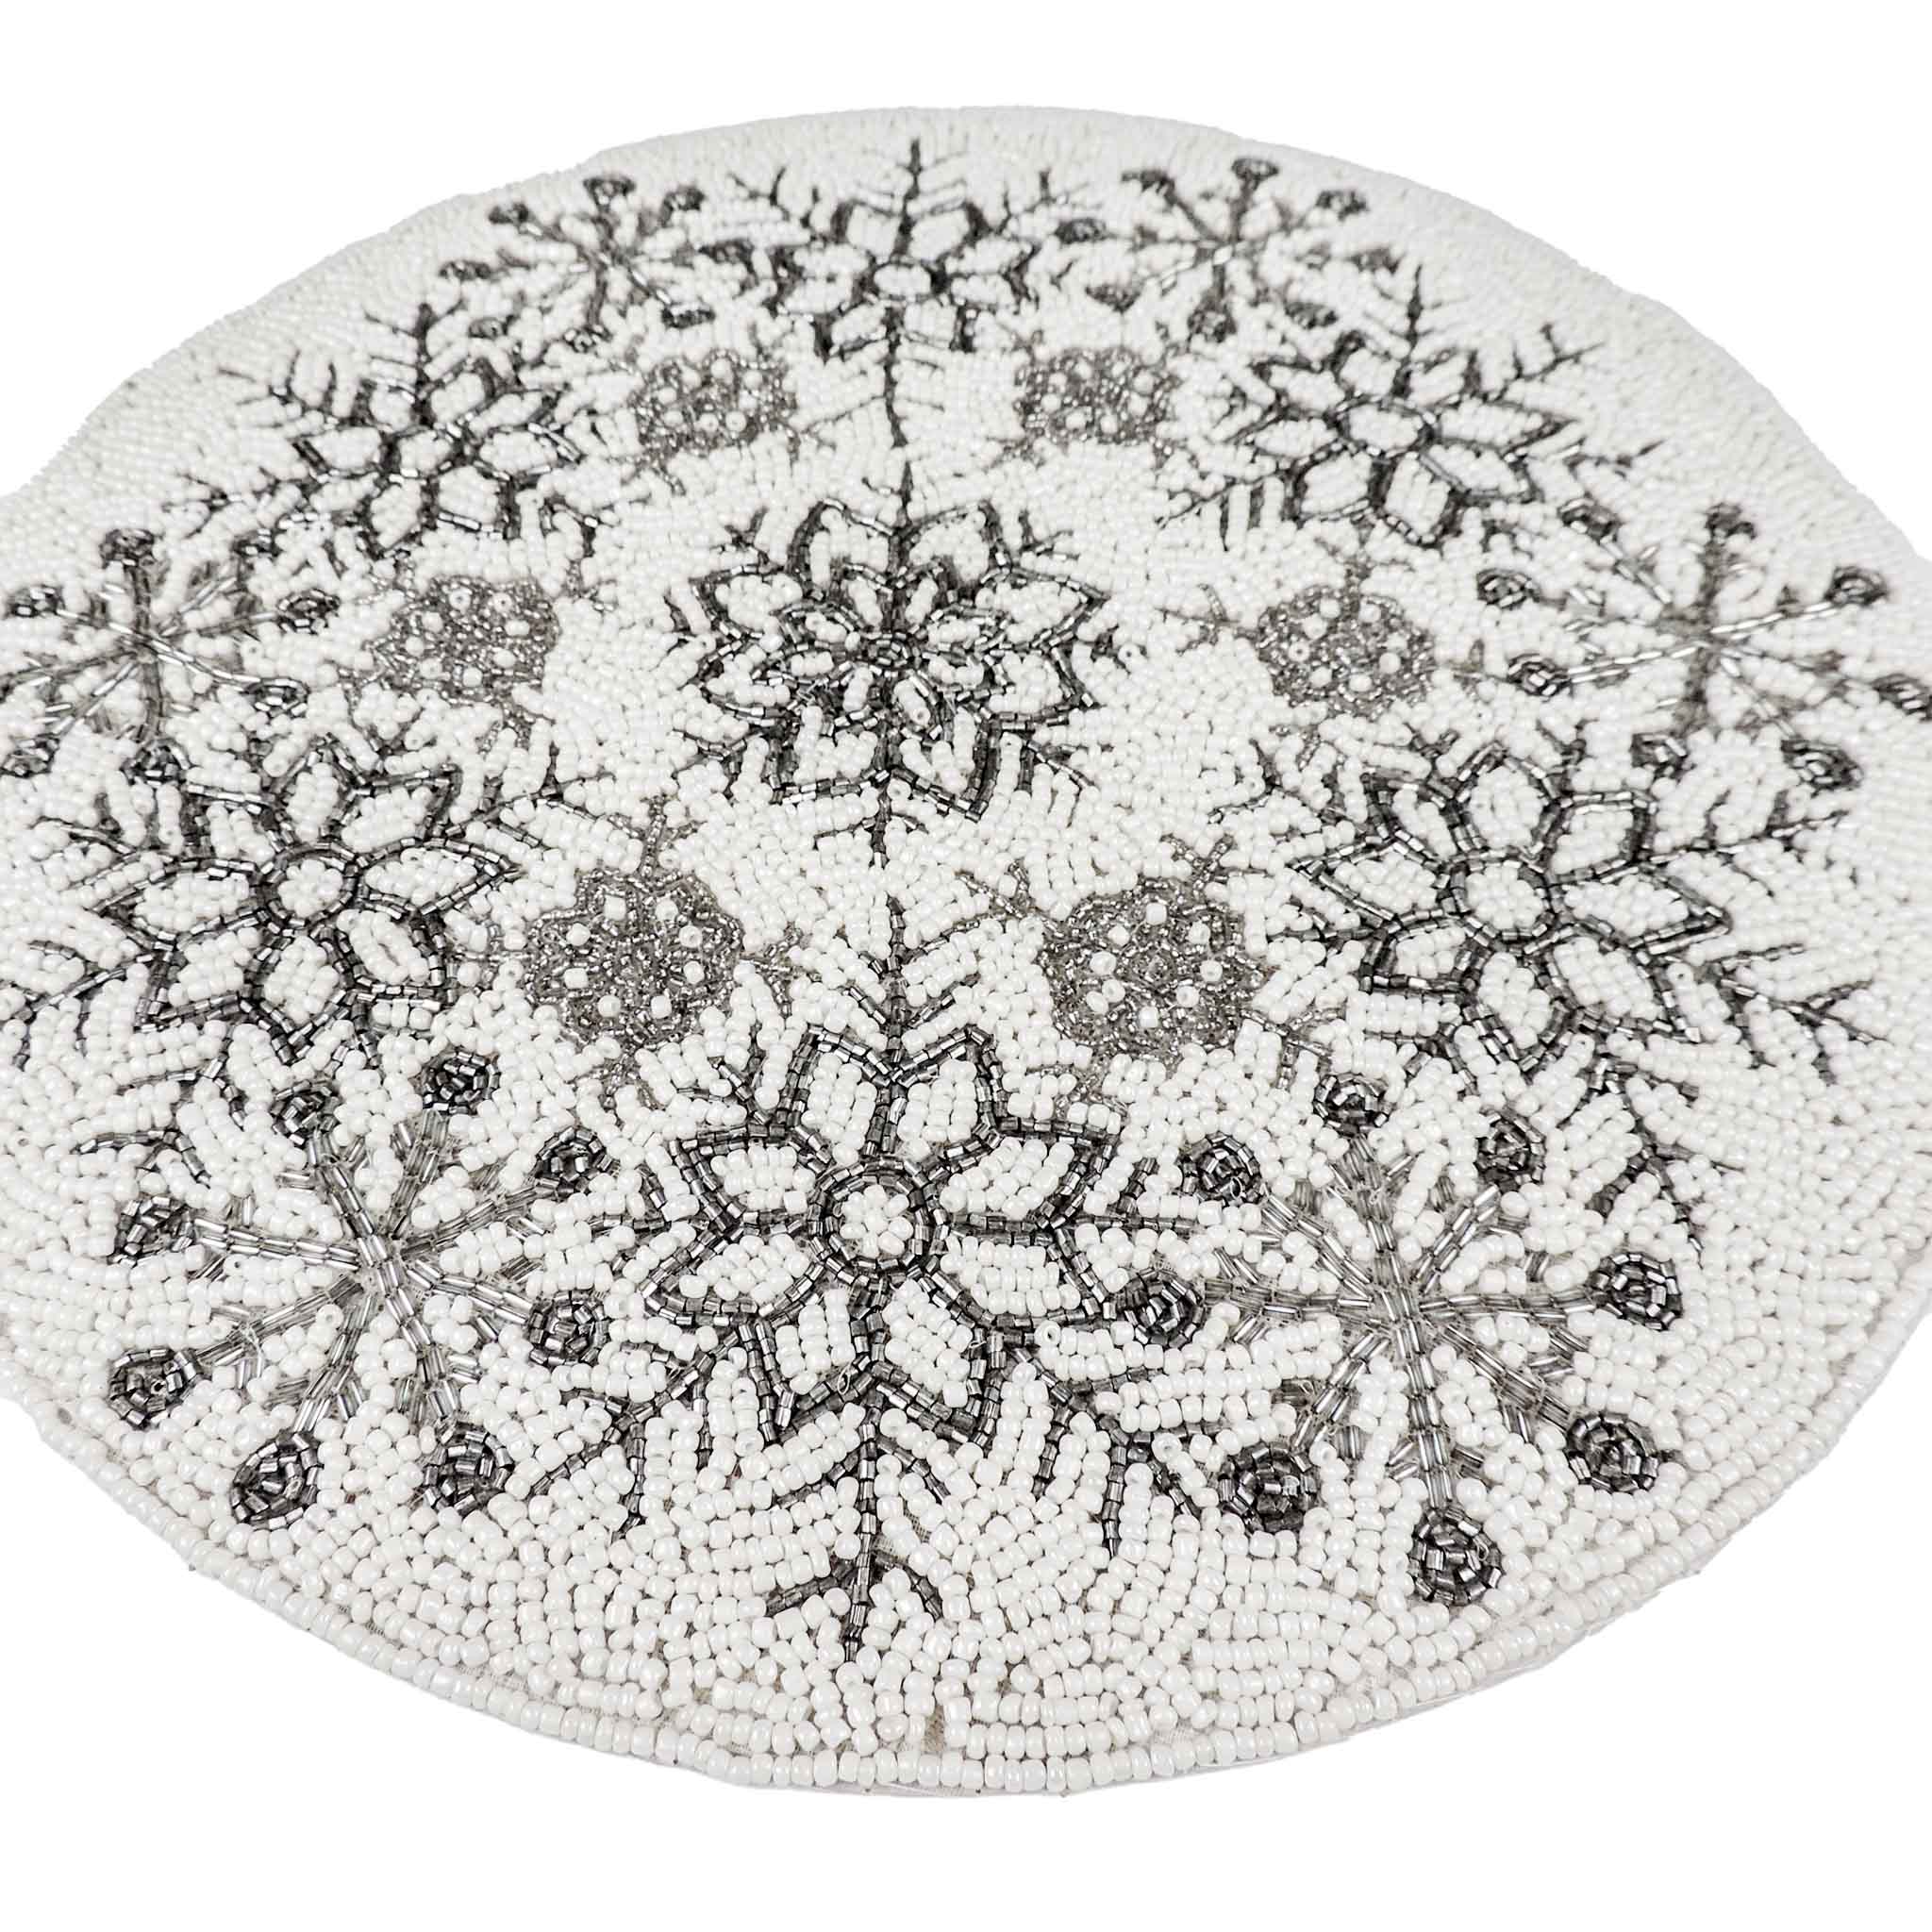 Chill-Out Bead Embroidered Placemat in Cream & Silver, Set of 2/4